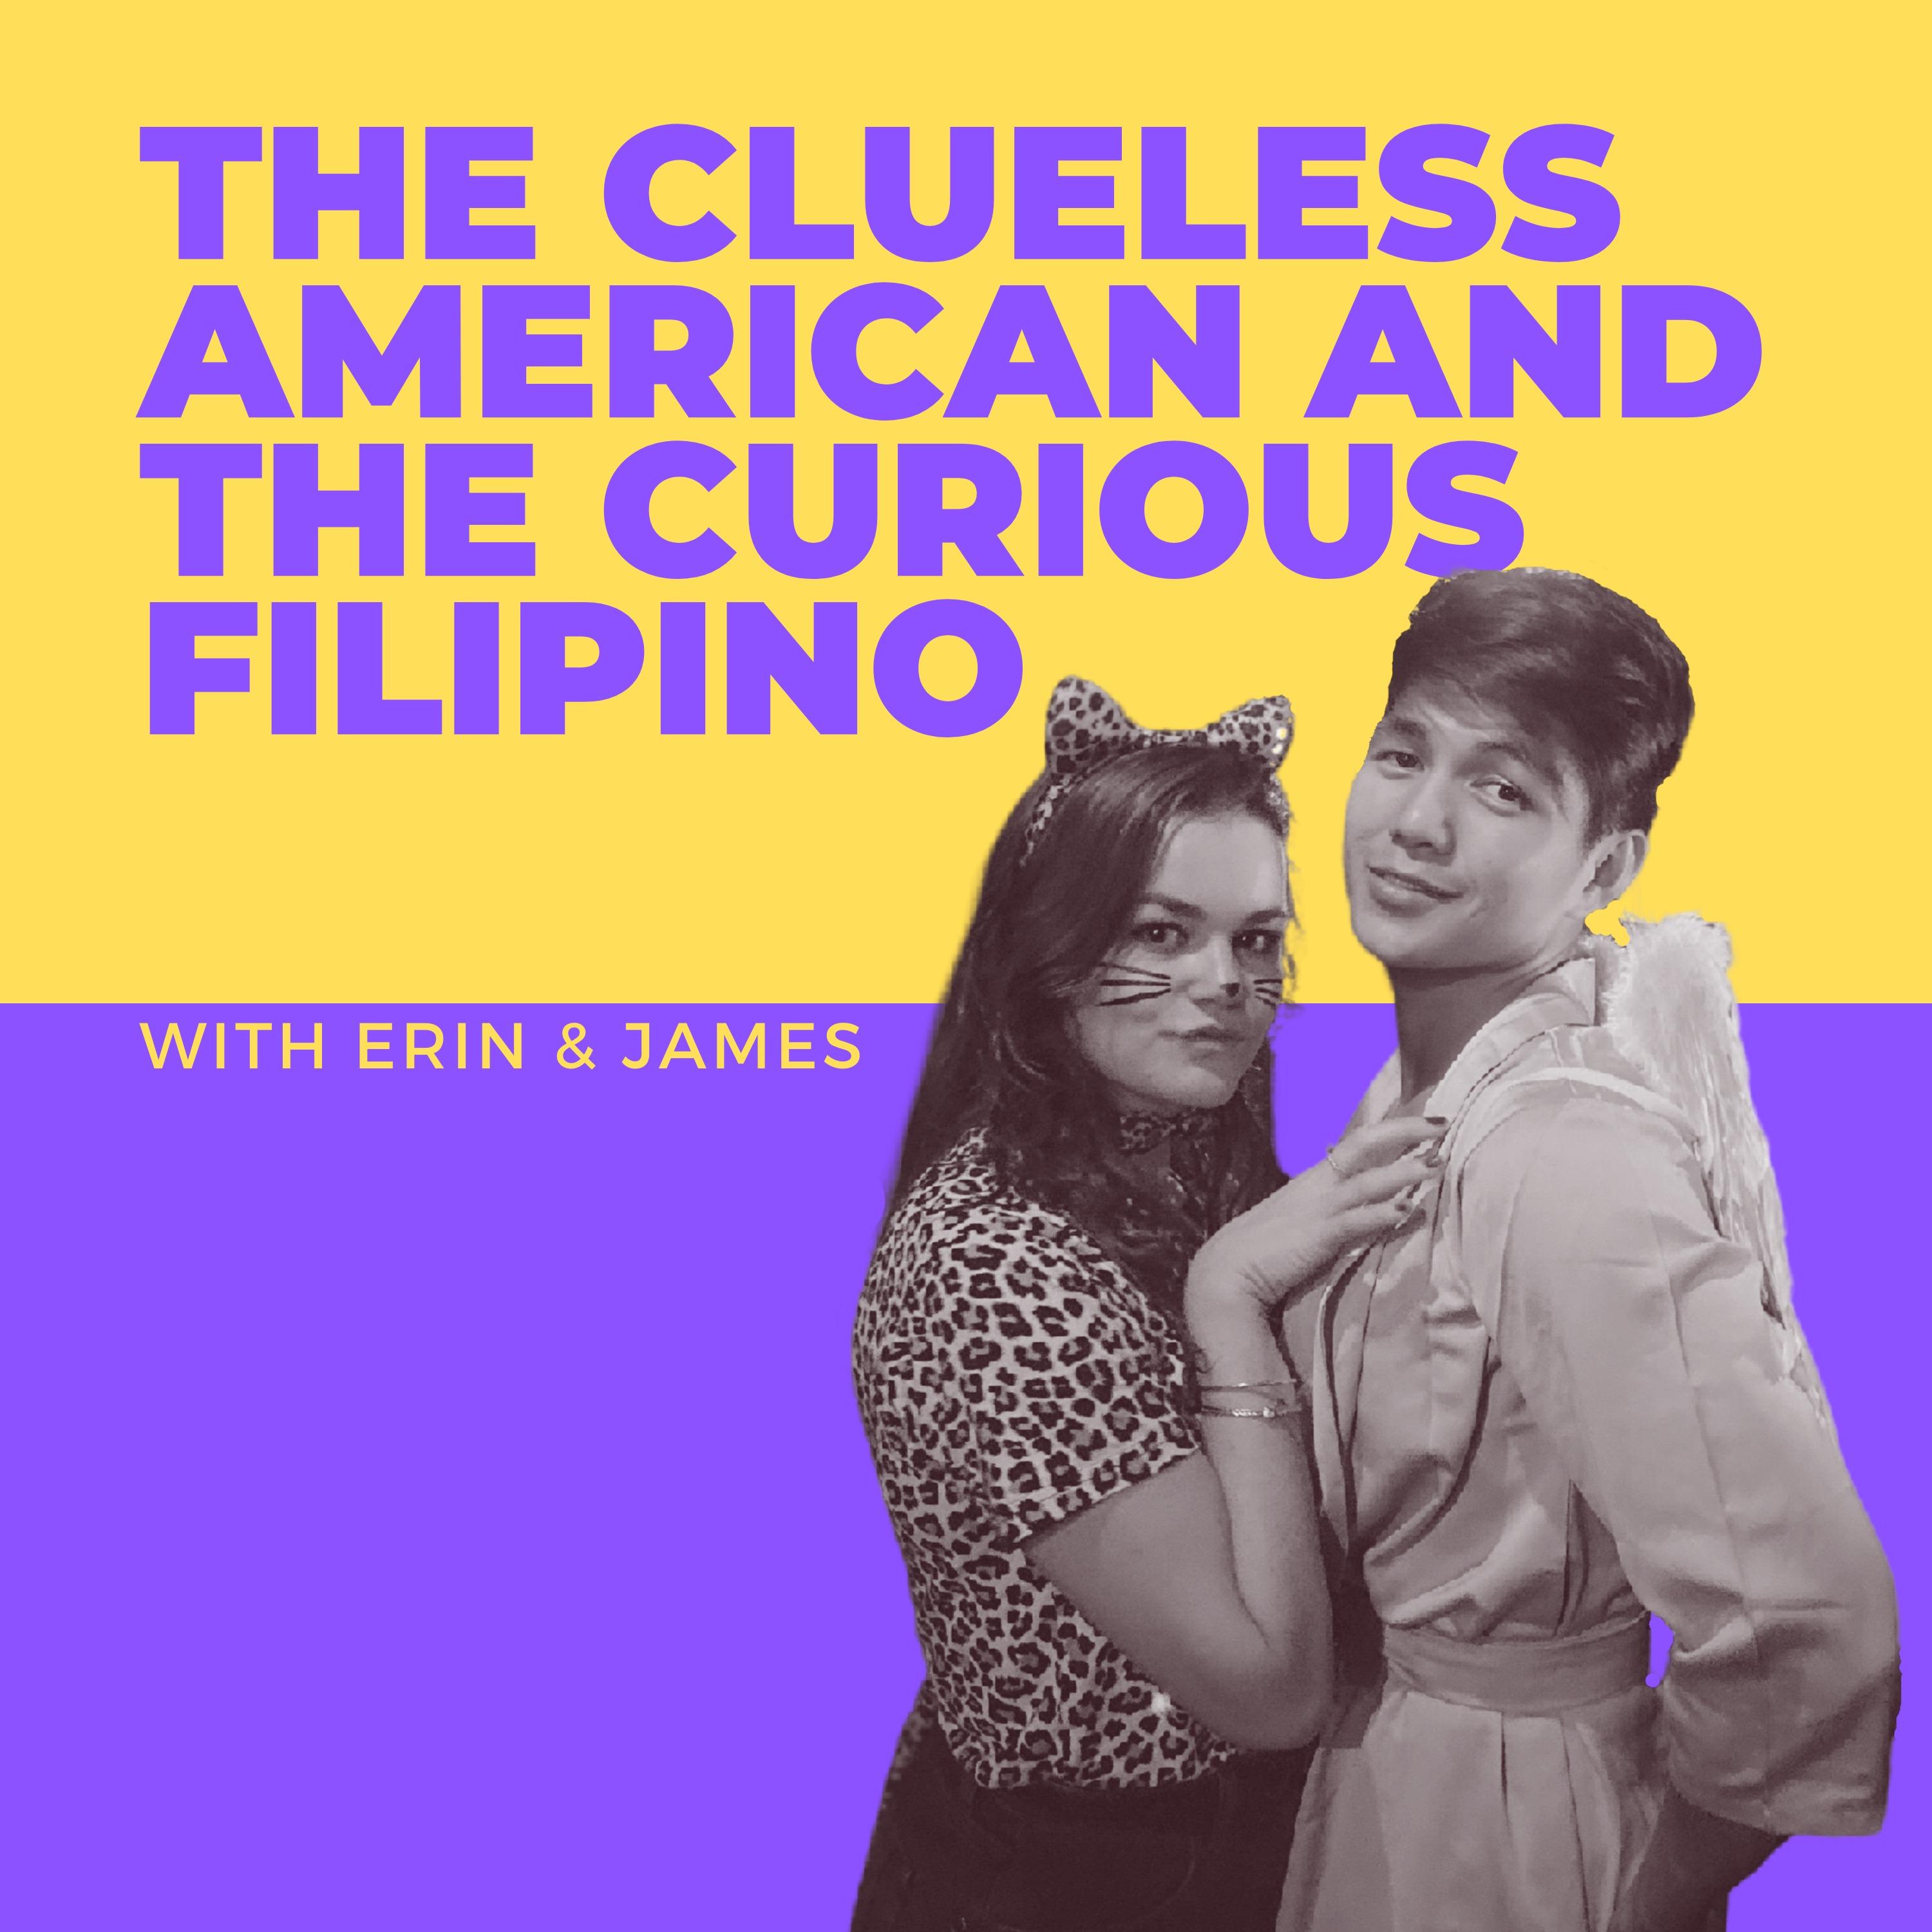 The Clueless American and The Curious Filipino